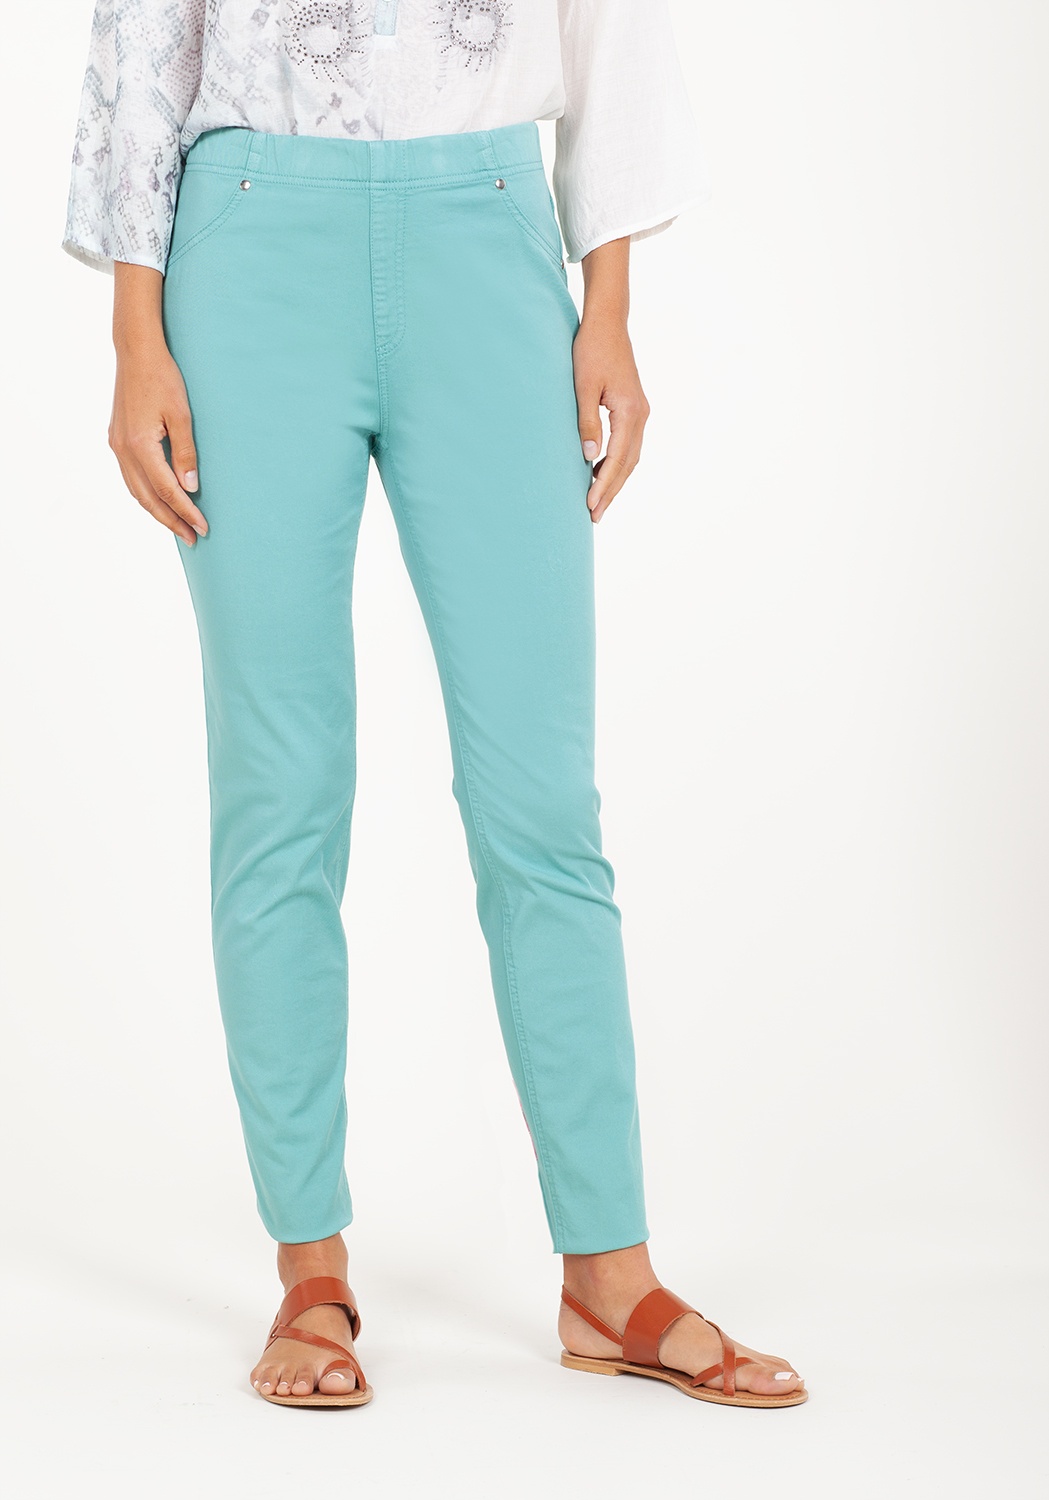 Skinny Turquoise Trousers 1